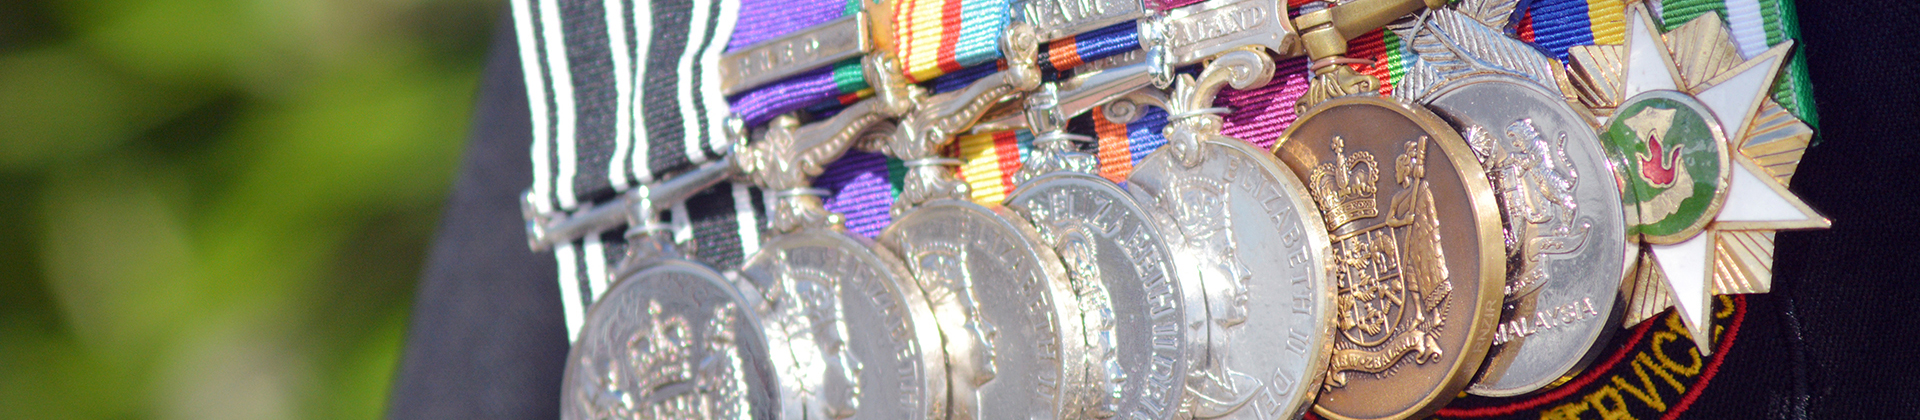 REPLICA DISTINGUISHED CONDUCT MEDAL